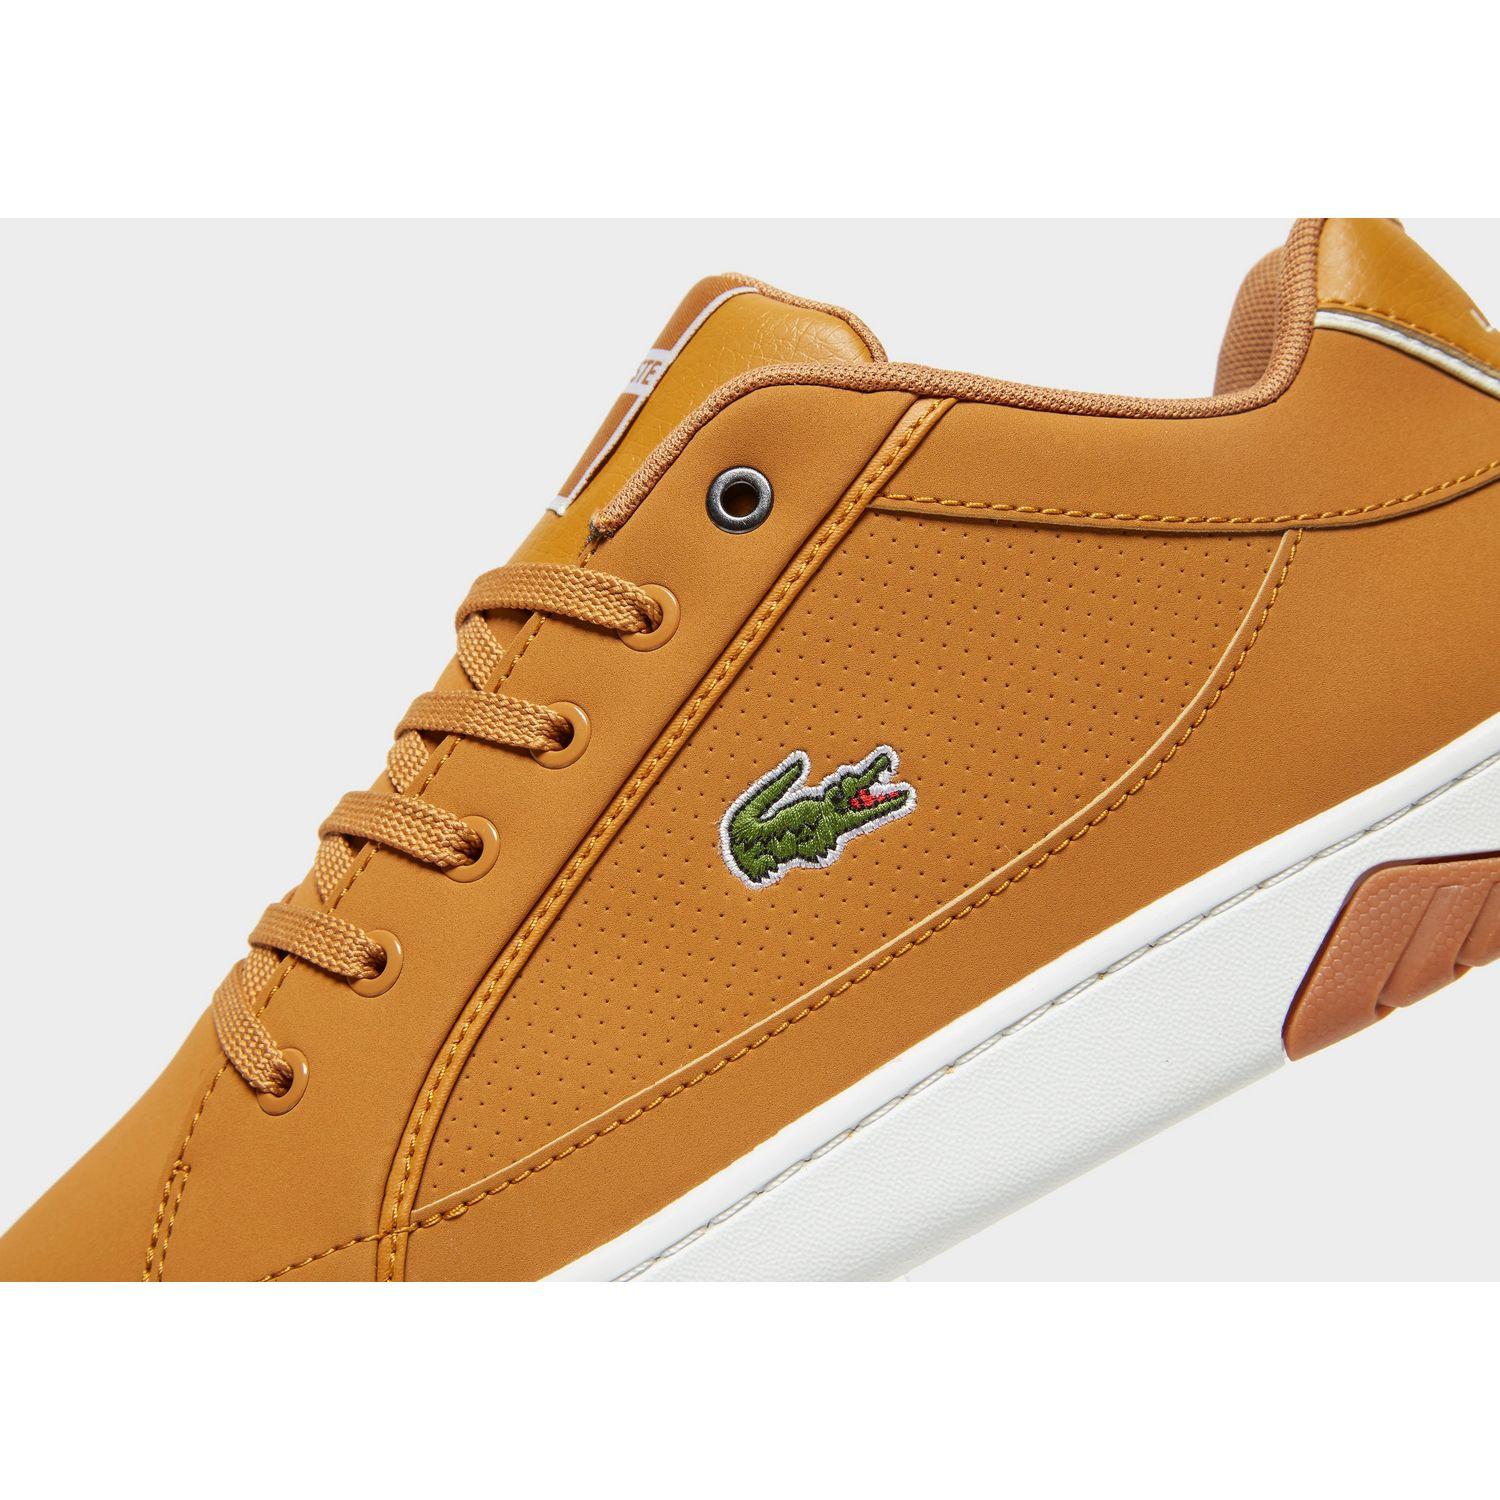 Lacoste Synthetic Deviation Ii in Brown 